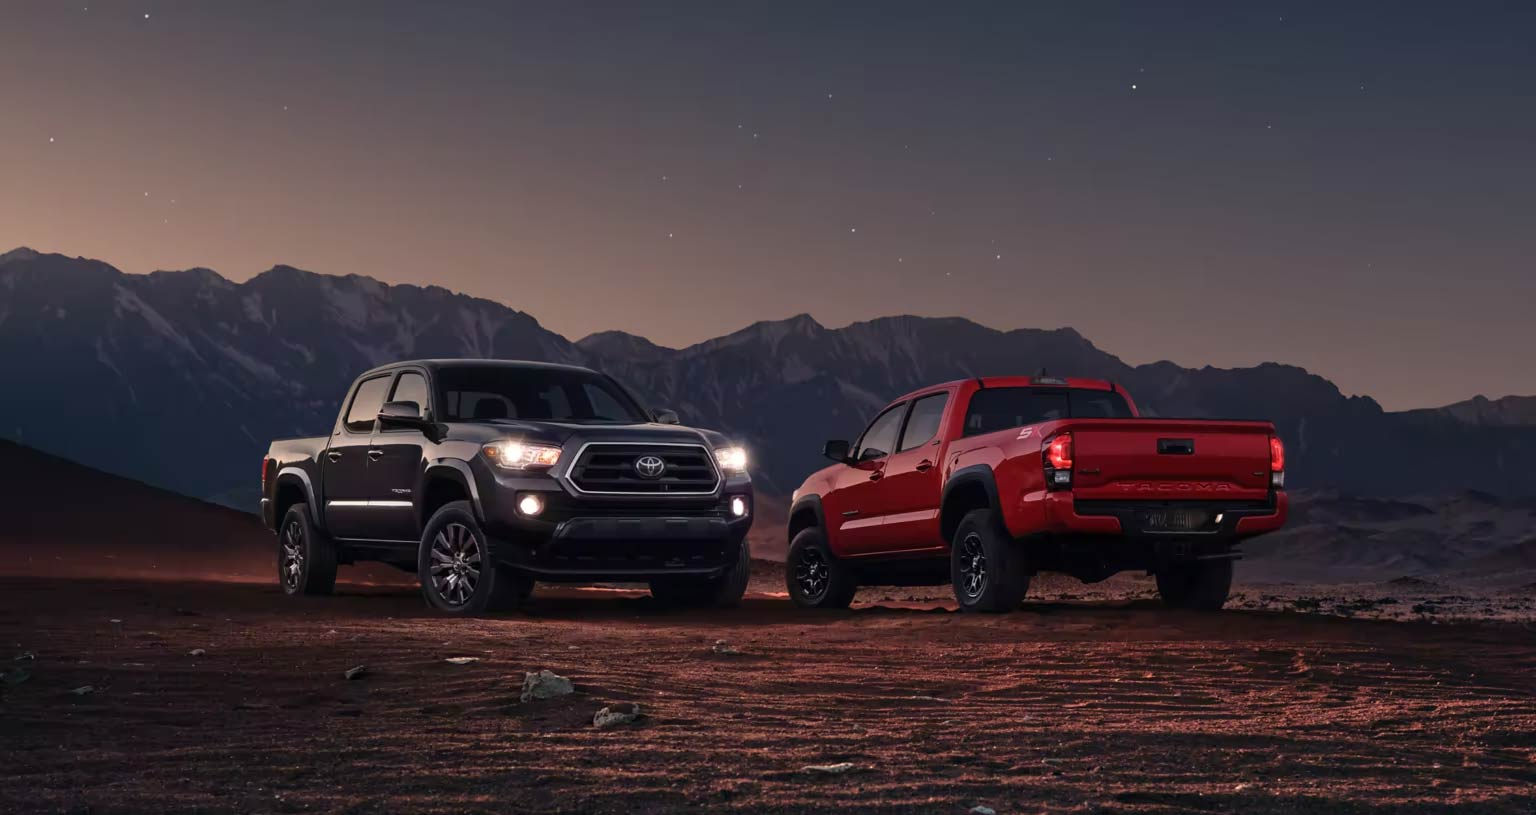 Two Toyota Tacoma Models Side by Side